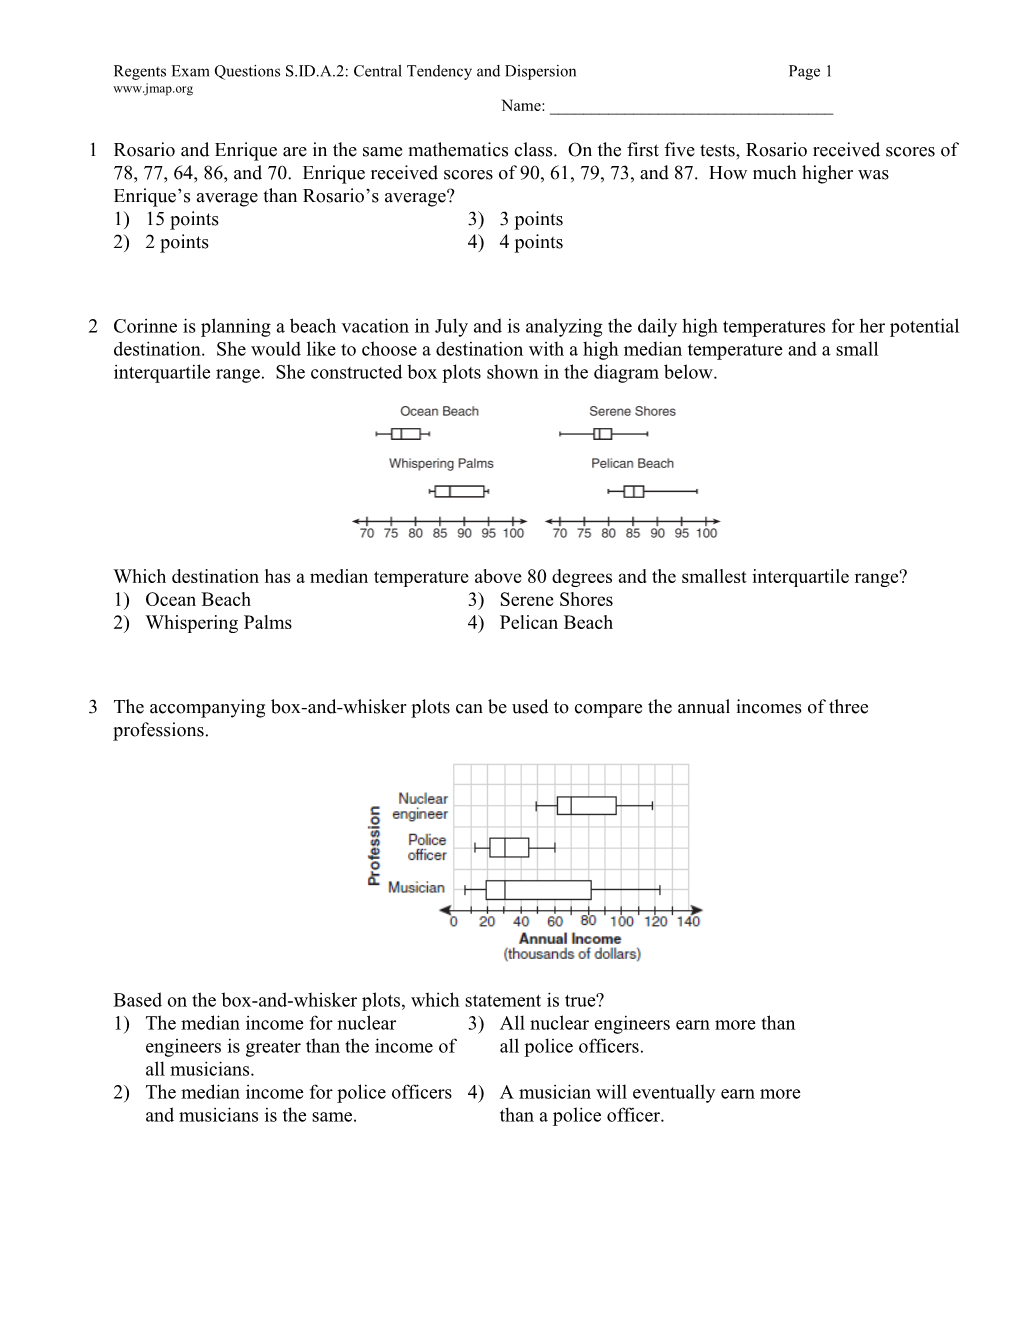 Regents Exam Questions S.ID.A.2: Central Tendency and Dispersionpage 1